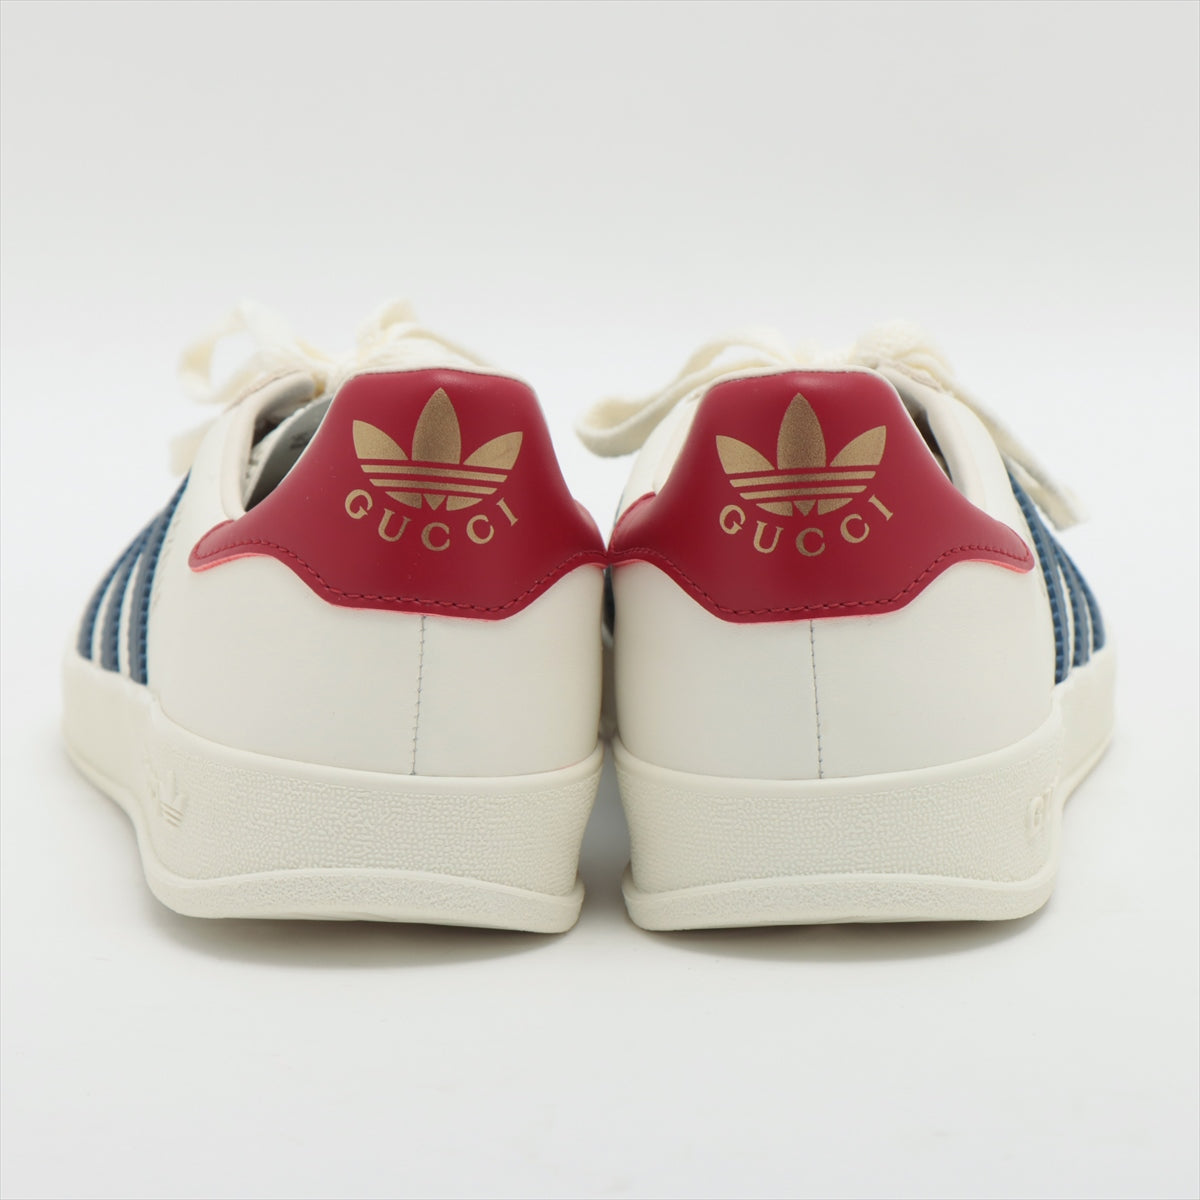 Gucci x adidas Gazelle Leather & suede Sneakers 26cm Men's White 646652 Is there a replacement string